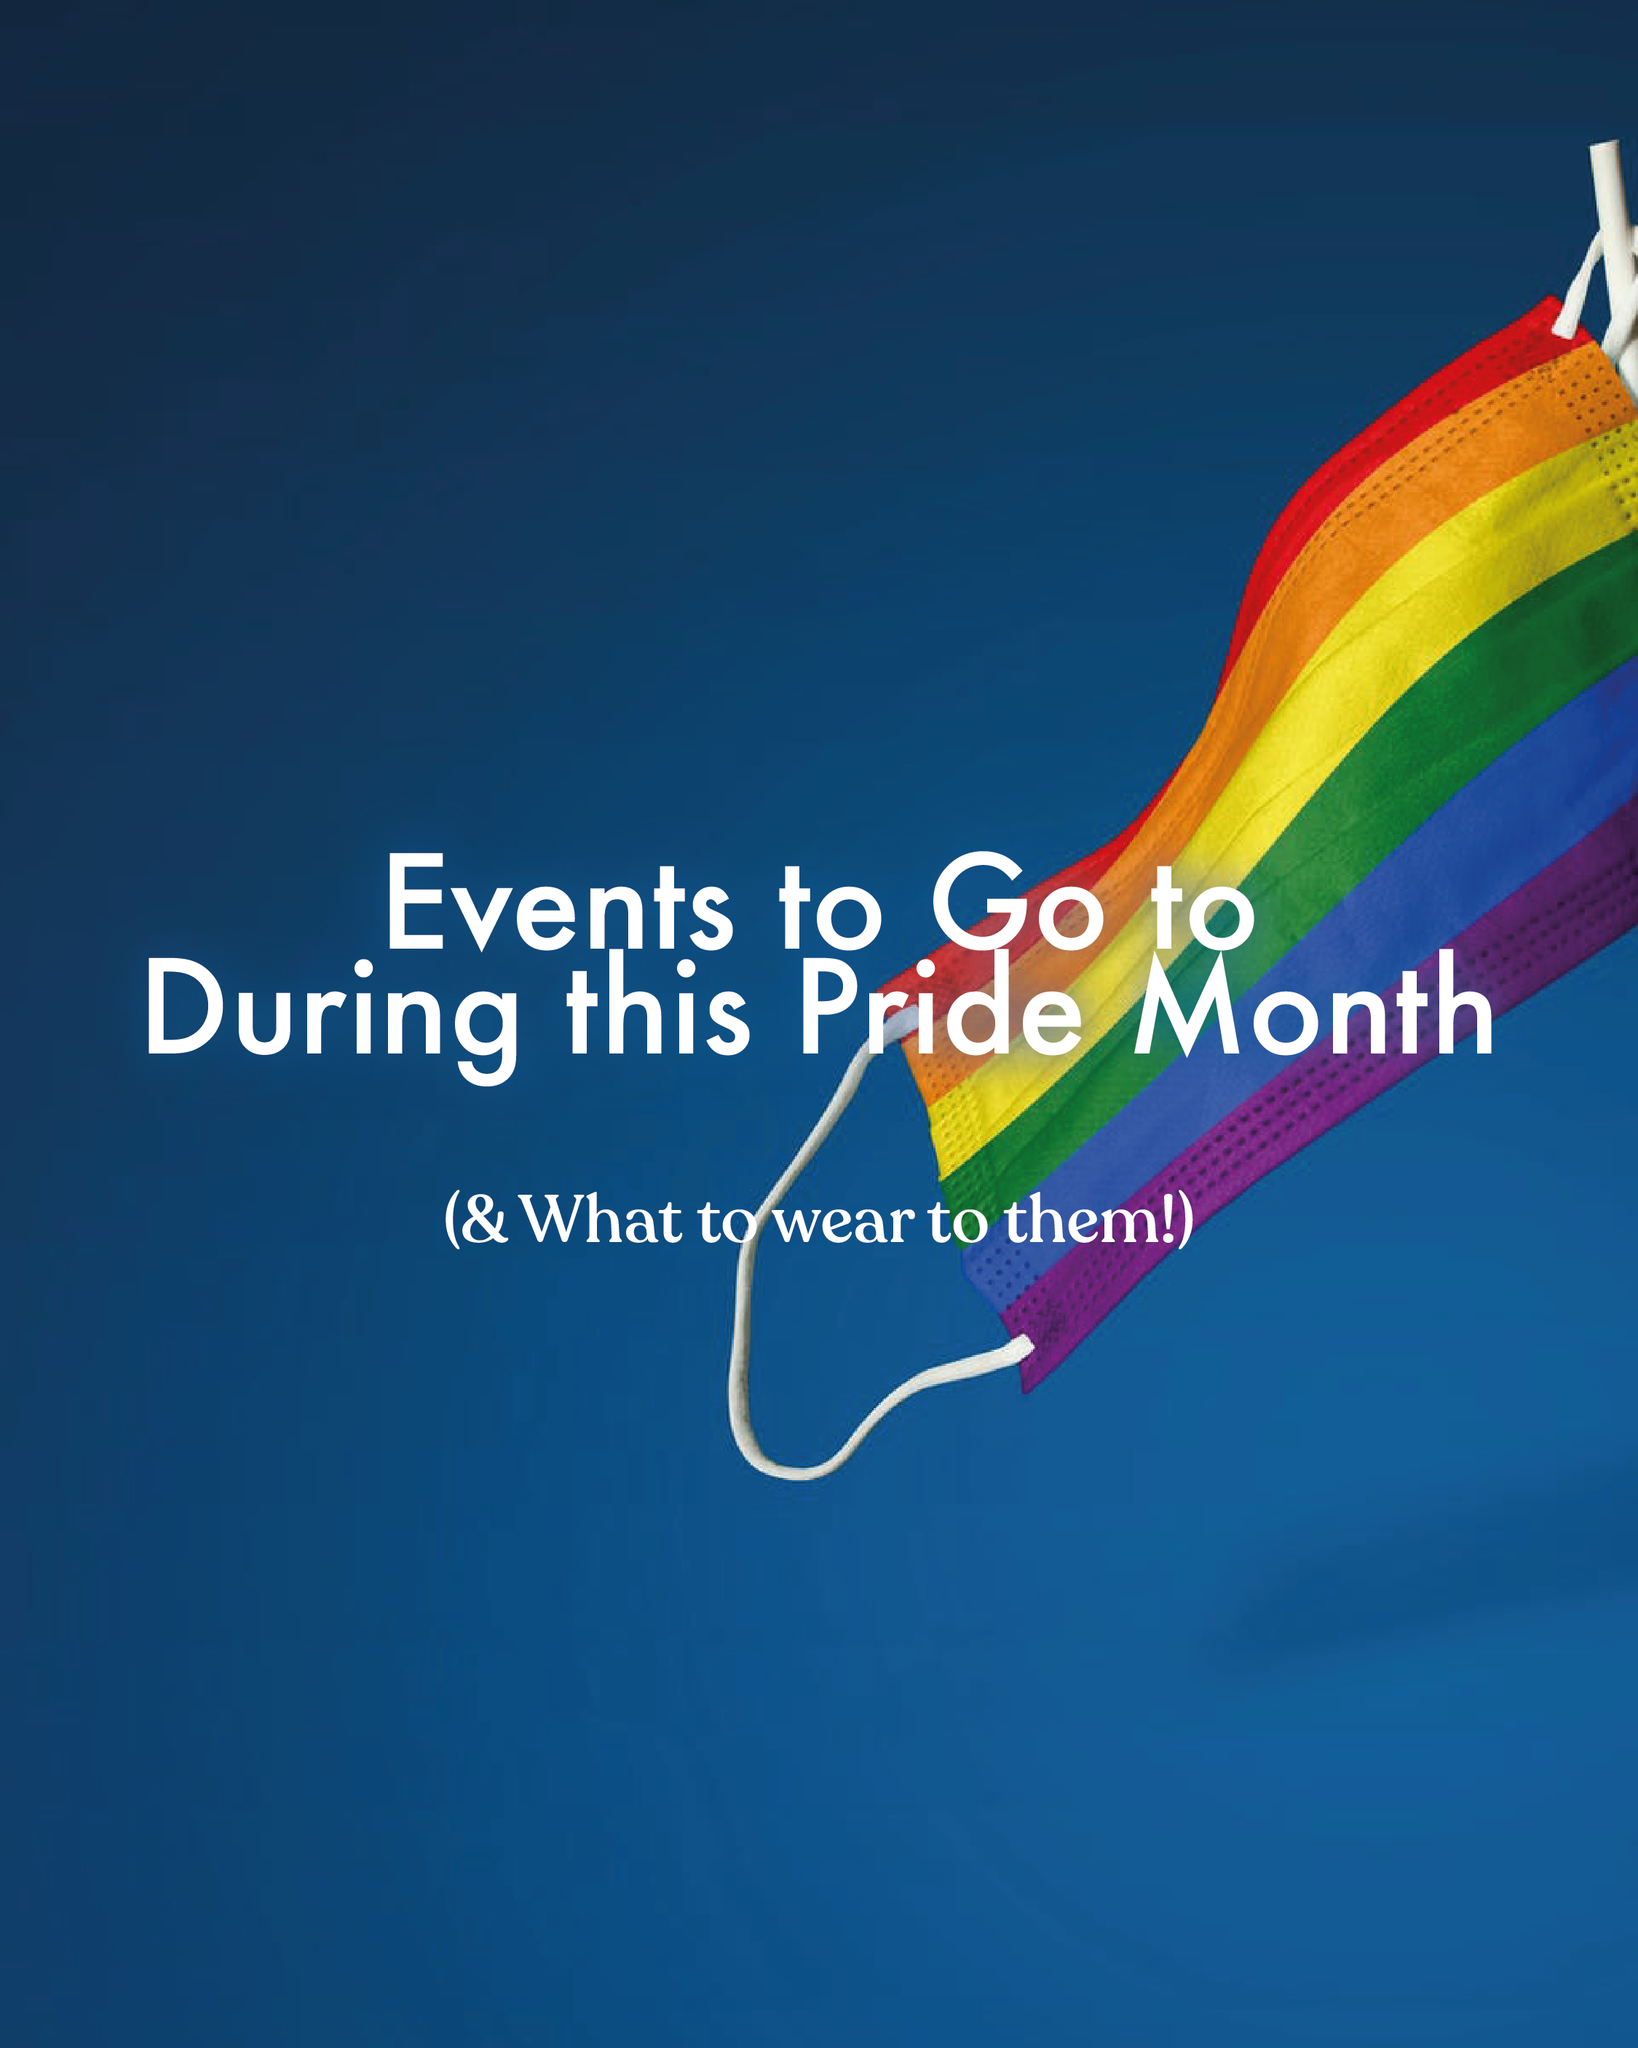 Events We're Going During This Pride Month (& Our Fabulous Ensembles)